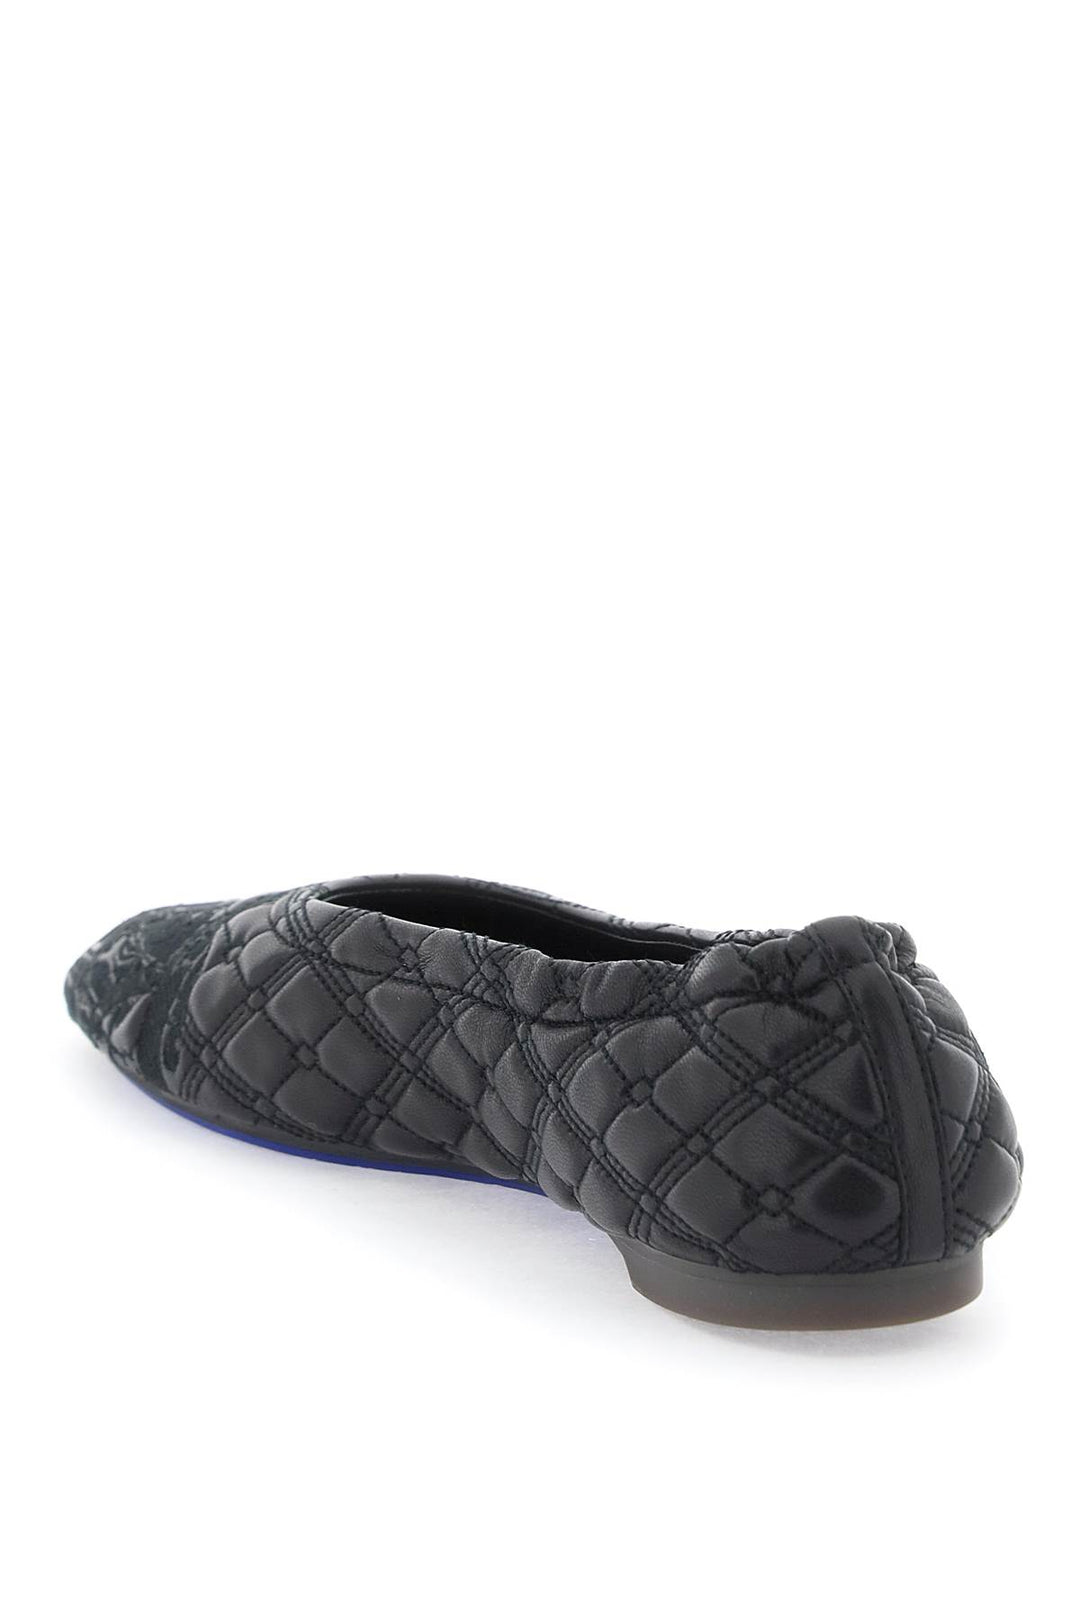 Burberry Quilted Leather Sadler Ballet Flats   Nero